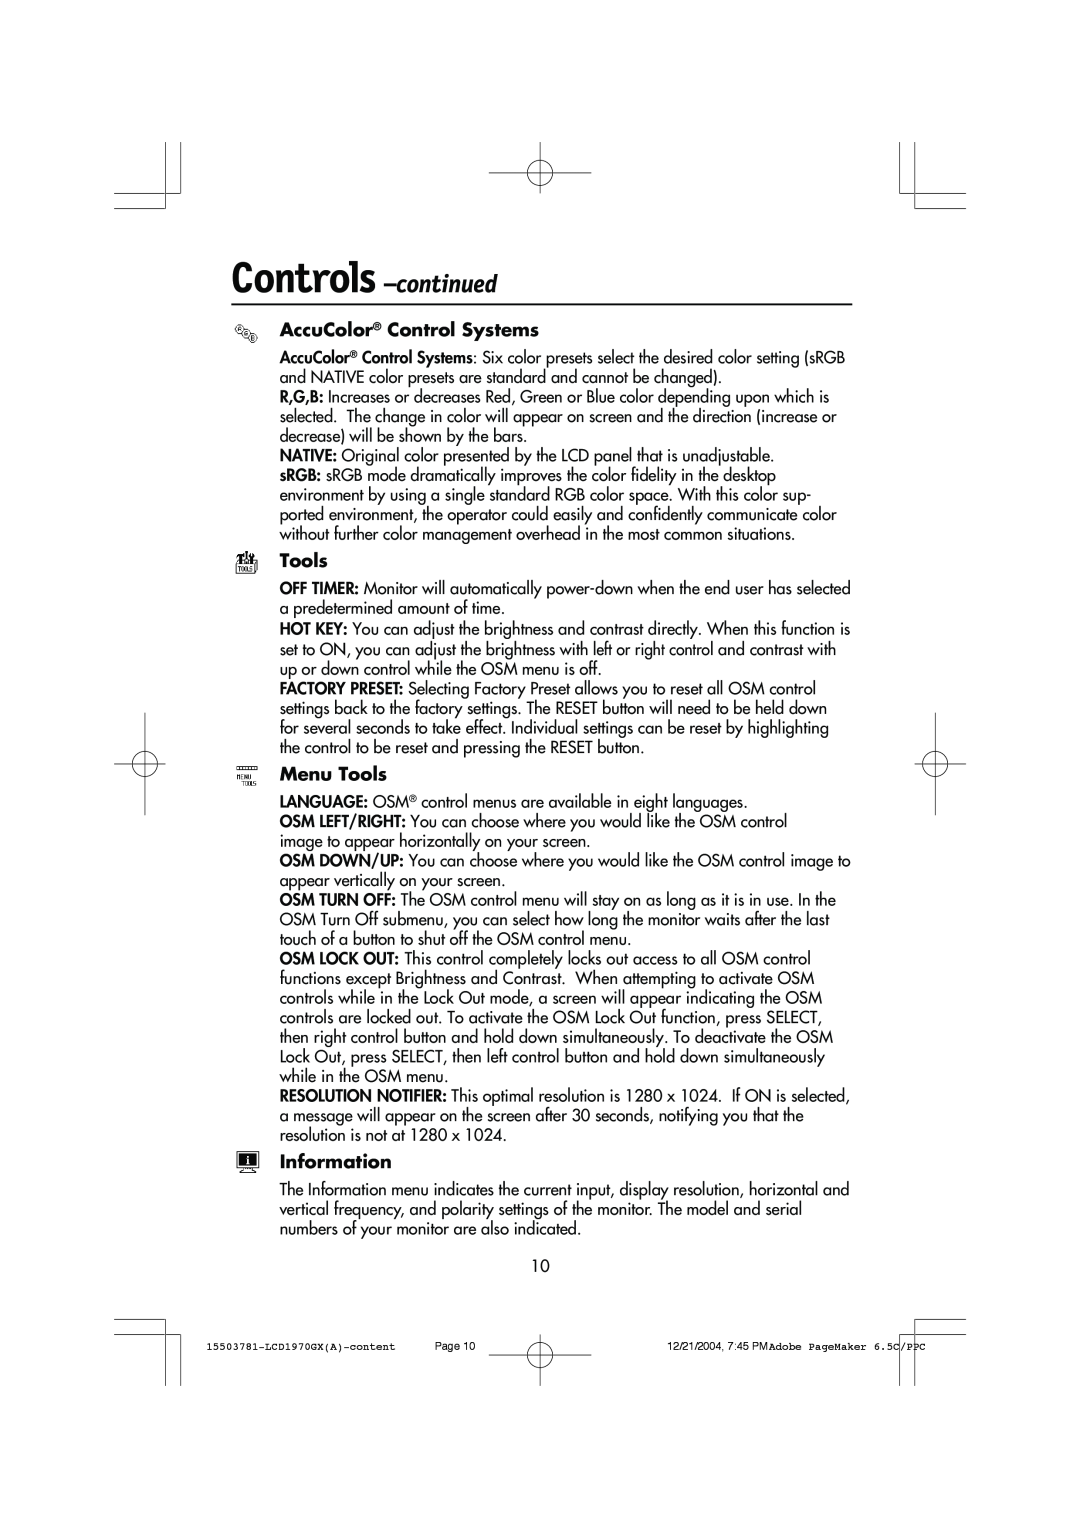 NEC LCD1970GX user manual Controls -continued, AccuColor Control Systems, Menu Tools, Information 